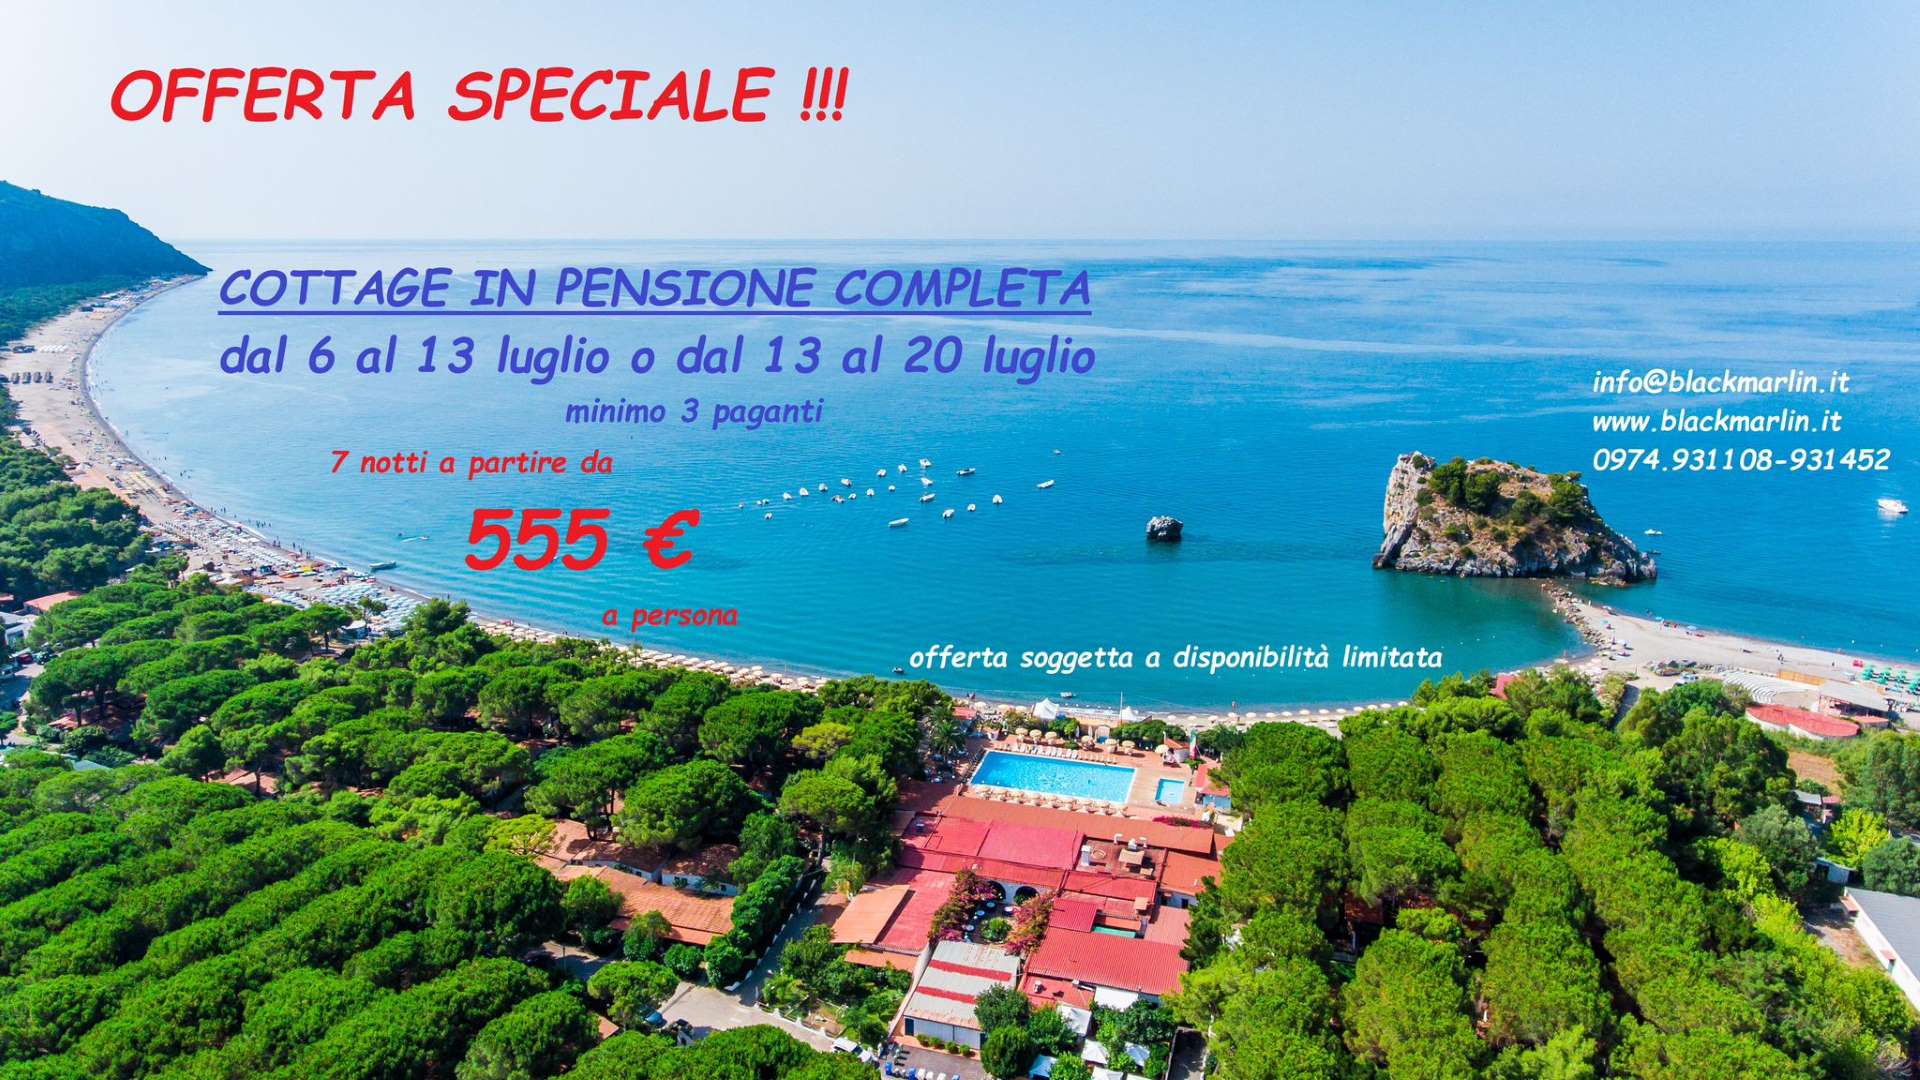 offerta speciale cottage